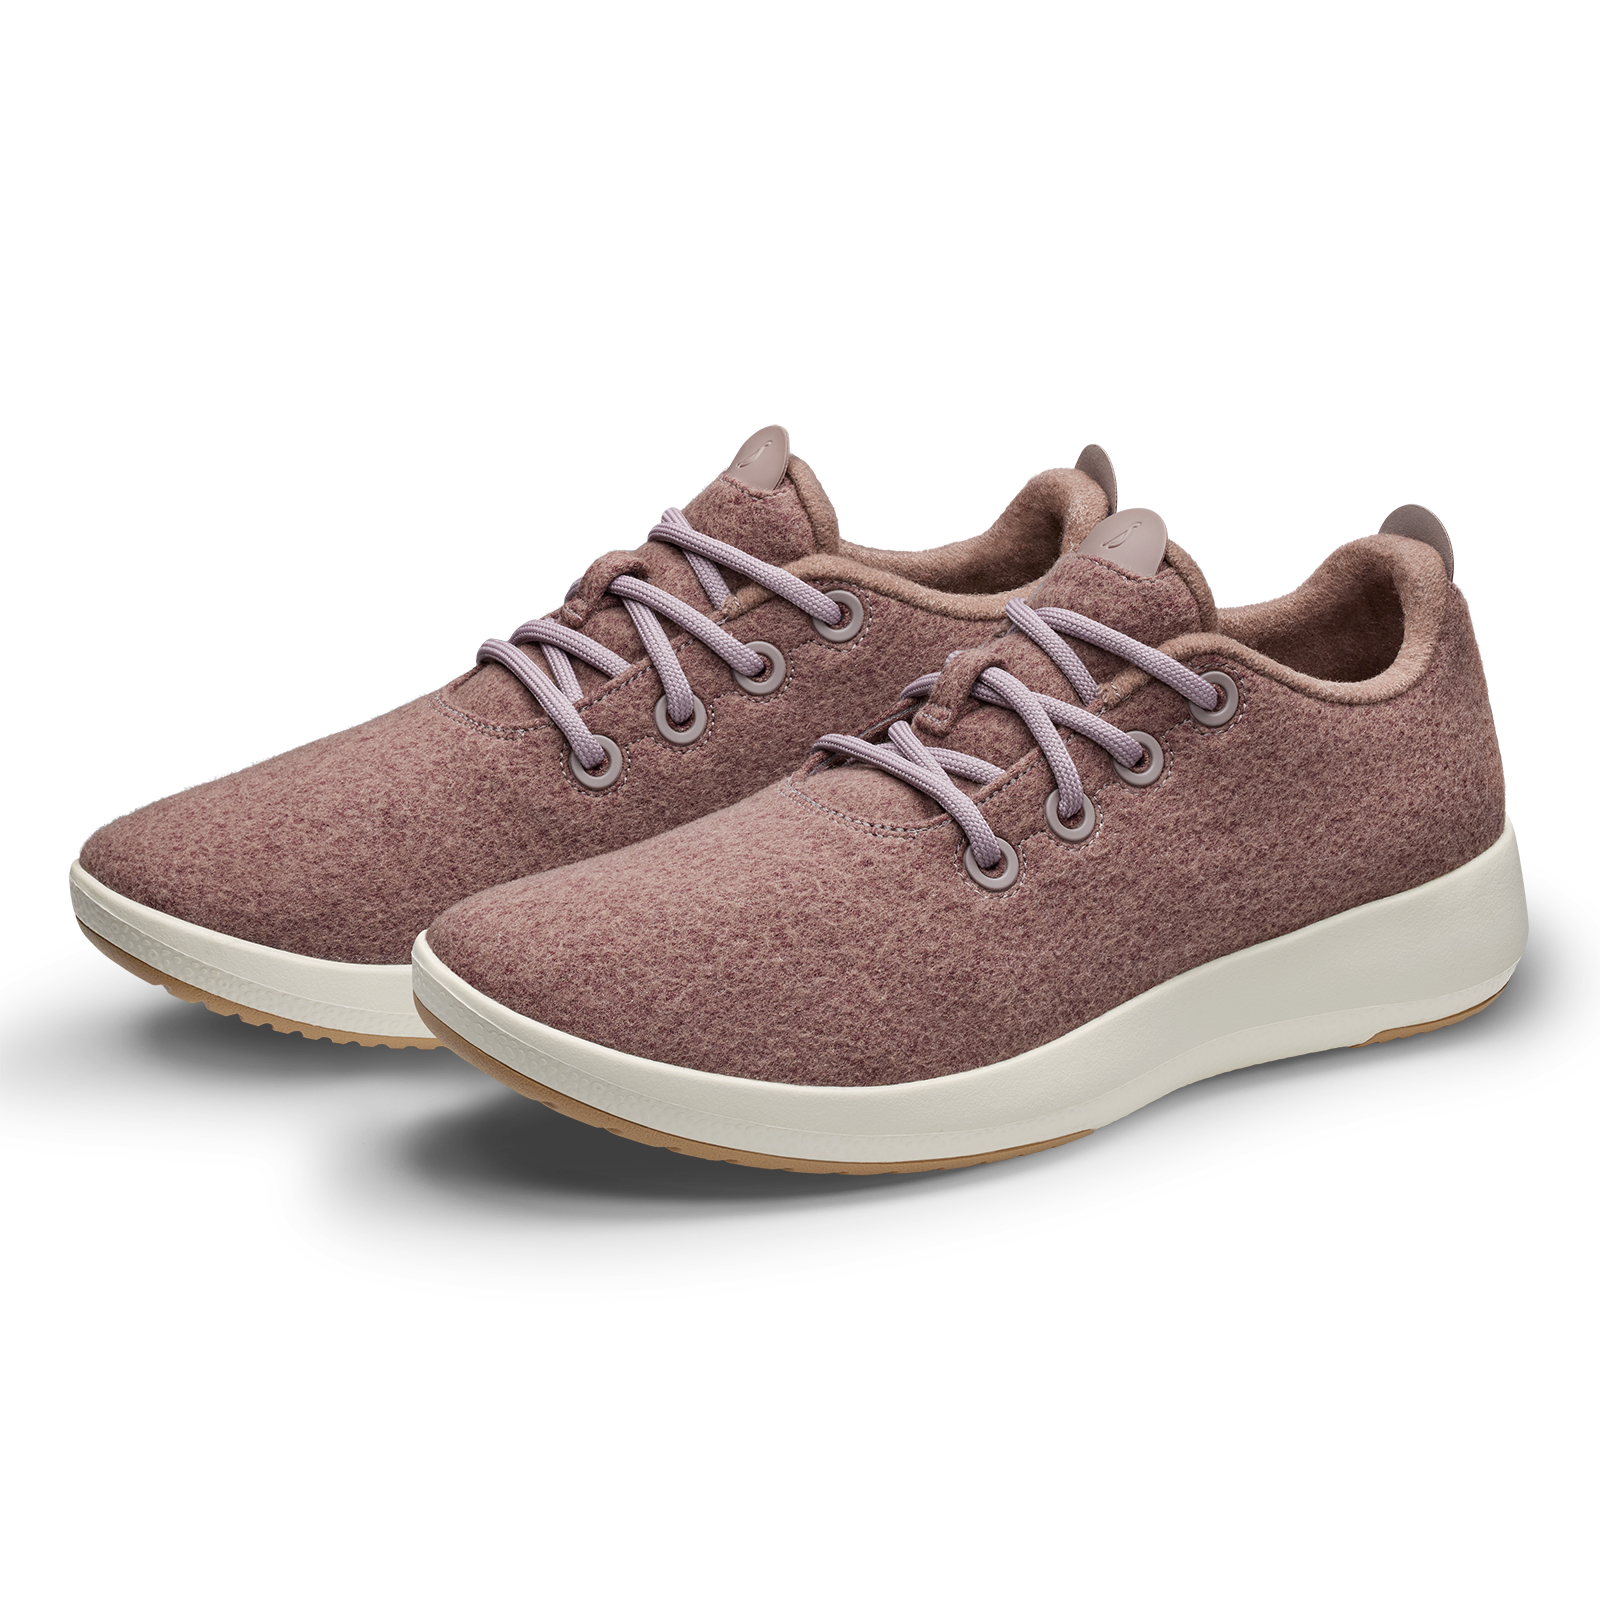 Women's Wool Runner Mizzles - Stormy Mauve (Natural White Sole